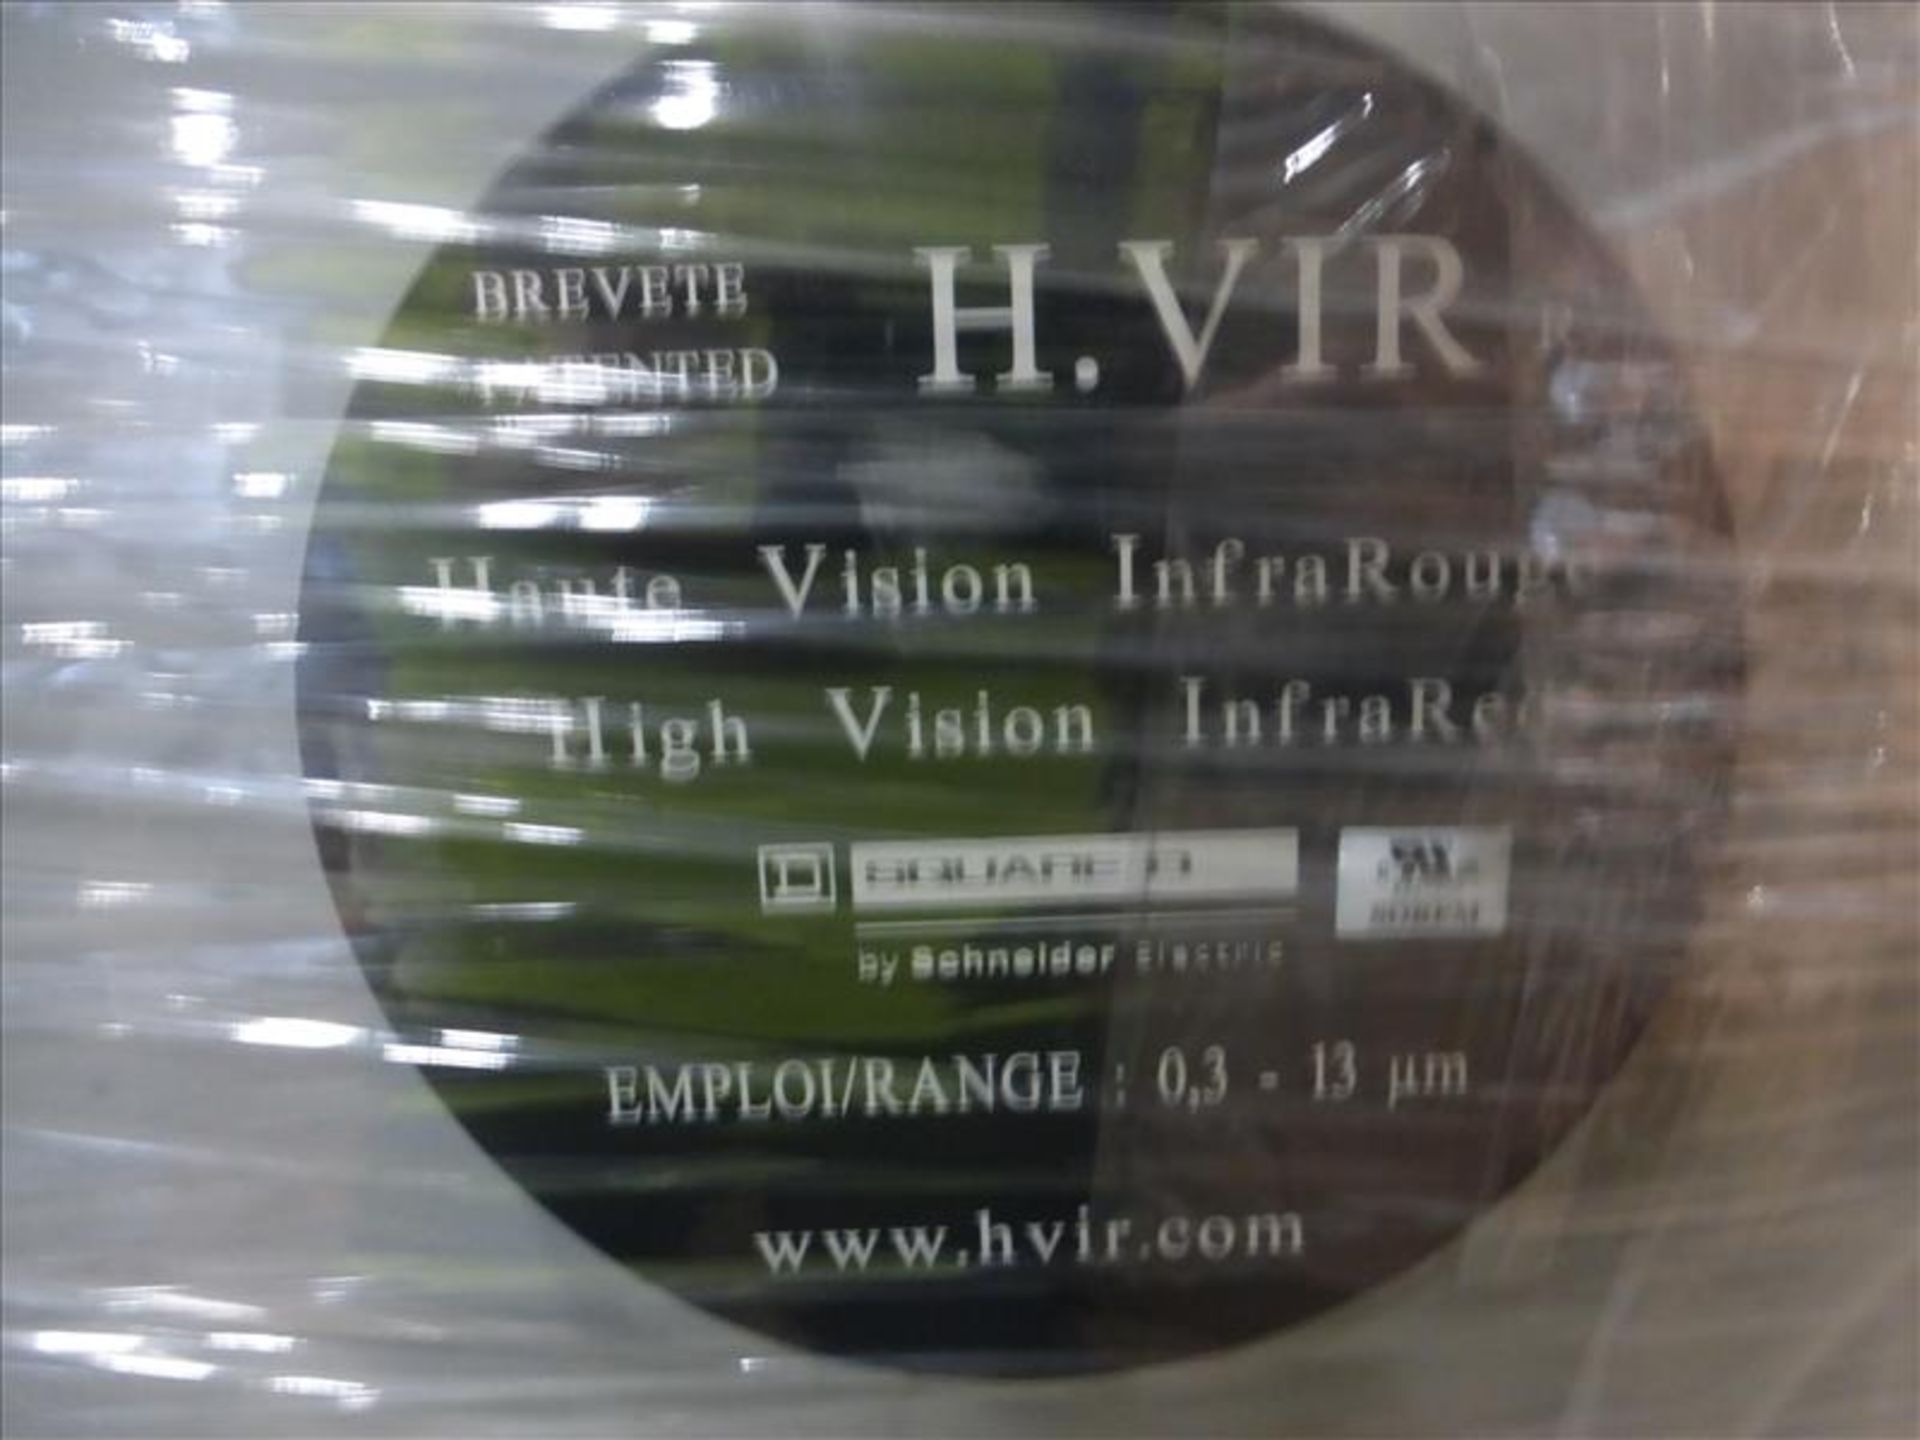 H.Vir High Vision InfraRed Unit (2) InfraRed Units - Image 3 of 5